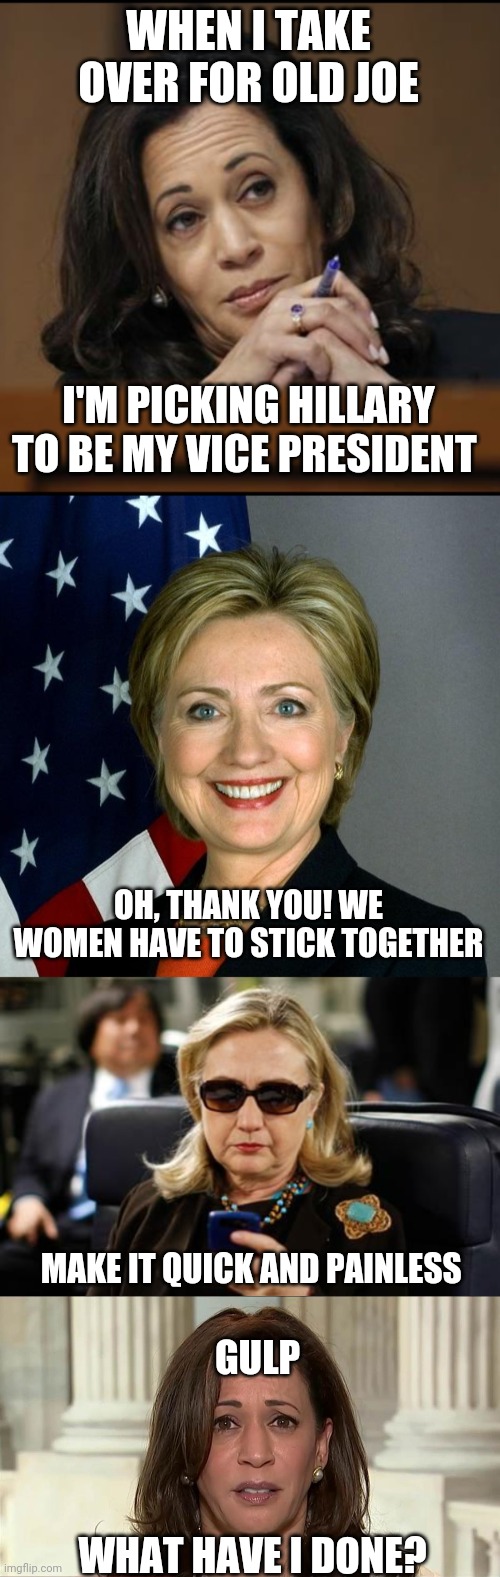 How Hillary becomes President | WHEN I TAKE OVER FOR OLD JOE; I'M PICKING HILLARY TO BE MY VICE PRESIDENT; OH, THANK YOU! WE WOMEN HAVE TO STICK TOGETHER; MAKE IT QUICK AND PAINLESS; GULP; WHAT HAVE I DONE? | image tagged in kamala harris,memes,hillary clinton,hillary clinton cellphone | made w/ Imgflip meme maker